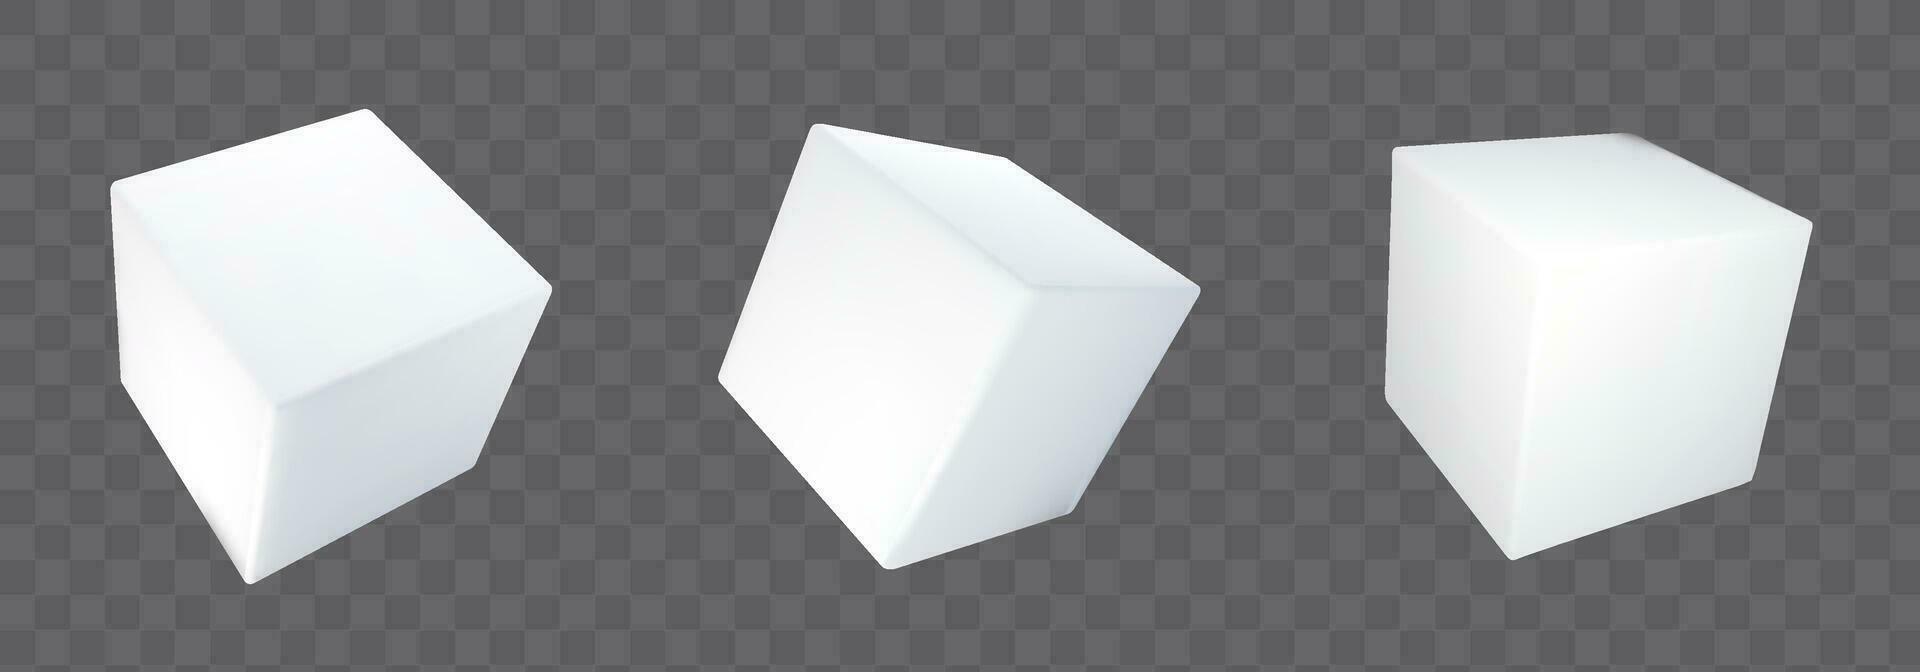 3d white cube box isolated vector. Blank paper solid shape perspective angle view set. Simple medicine or cosmetic side gift container rotate collection. Realistic product package render design. vector